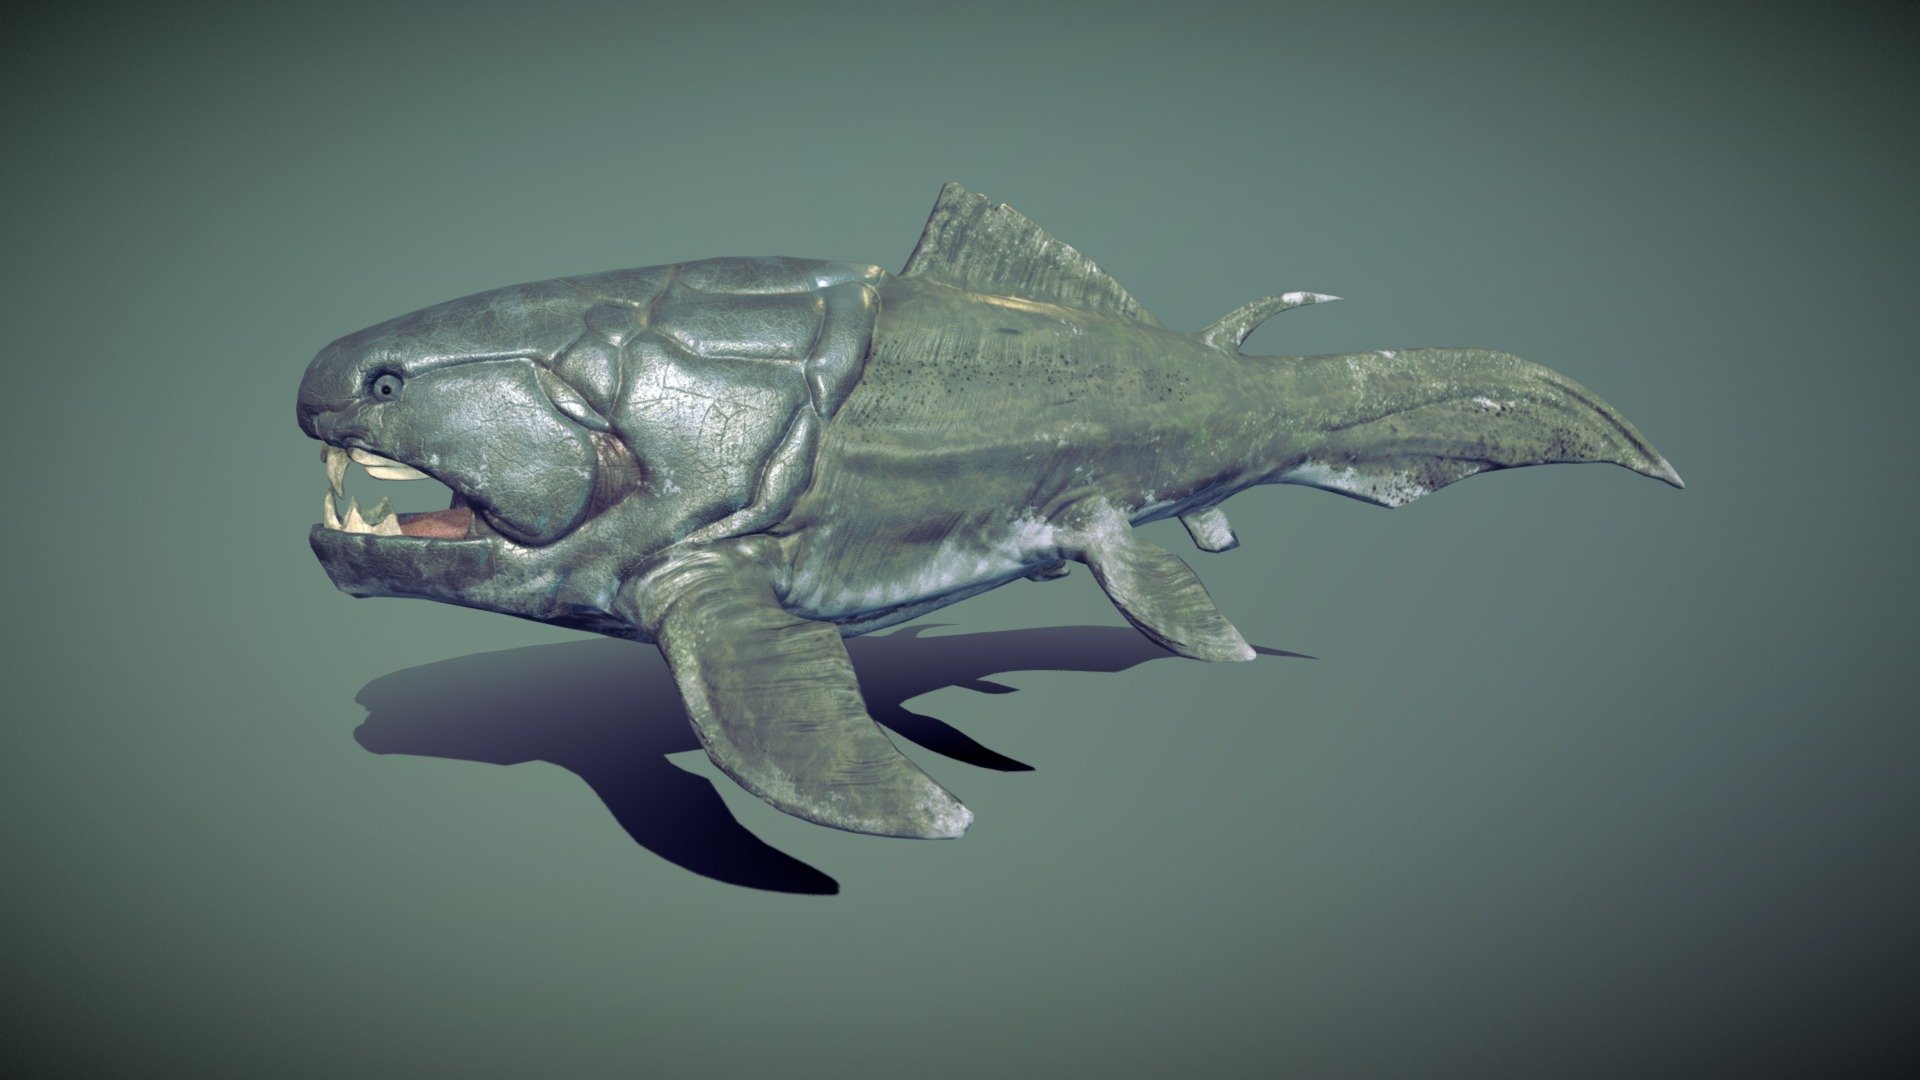 The Dunkleosteus 3d model was made in blender 2.9 and painted in substance painter , is subdivison ready and have a clean topology , without subdivision it haves 5234 verts and with subdivision 15006 verts , It is fully rigged with basic bones , it have a total of 4 animations : idle , swim ,speed up  and bite.

The texture comes with 4k, 2k and 1k textures  : diffuse , normal , metallic, roughness ,height/displacement and AO maps , baked normal map from a high poly model and place it in the low poly model , uv wrapped it manually .

Eyes ,teeth and tongue , all is in one texture. 

Comes with blend file and the textures attached in rar 3d model